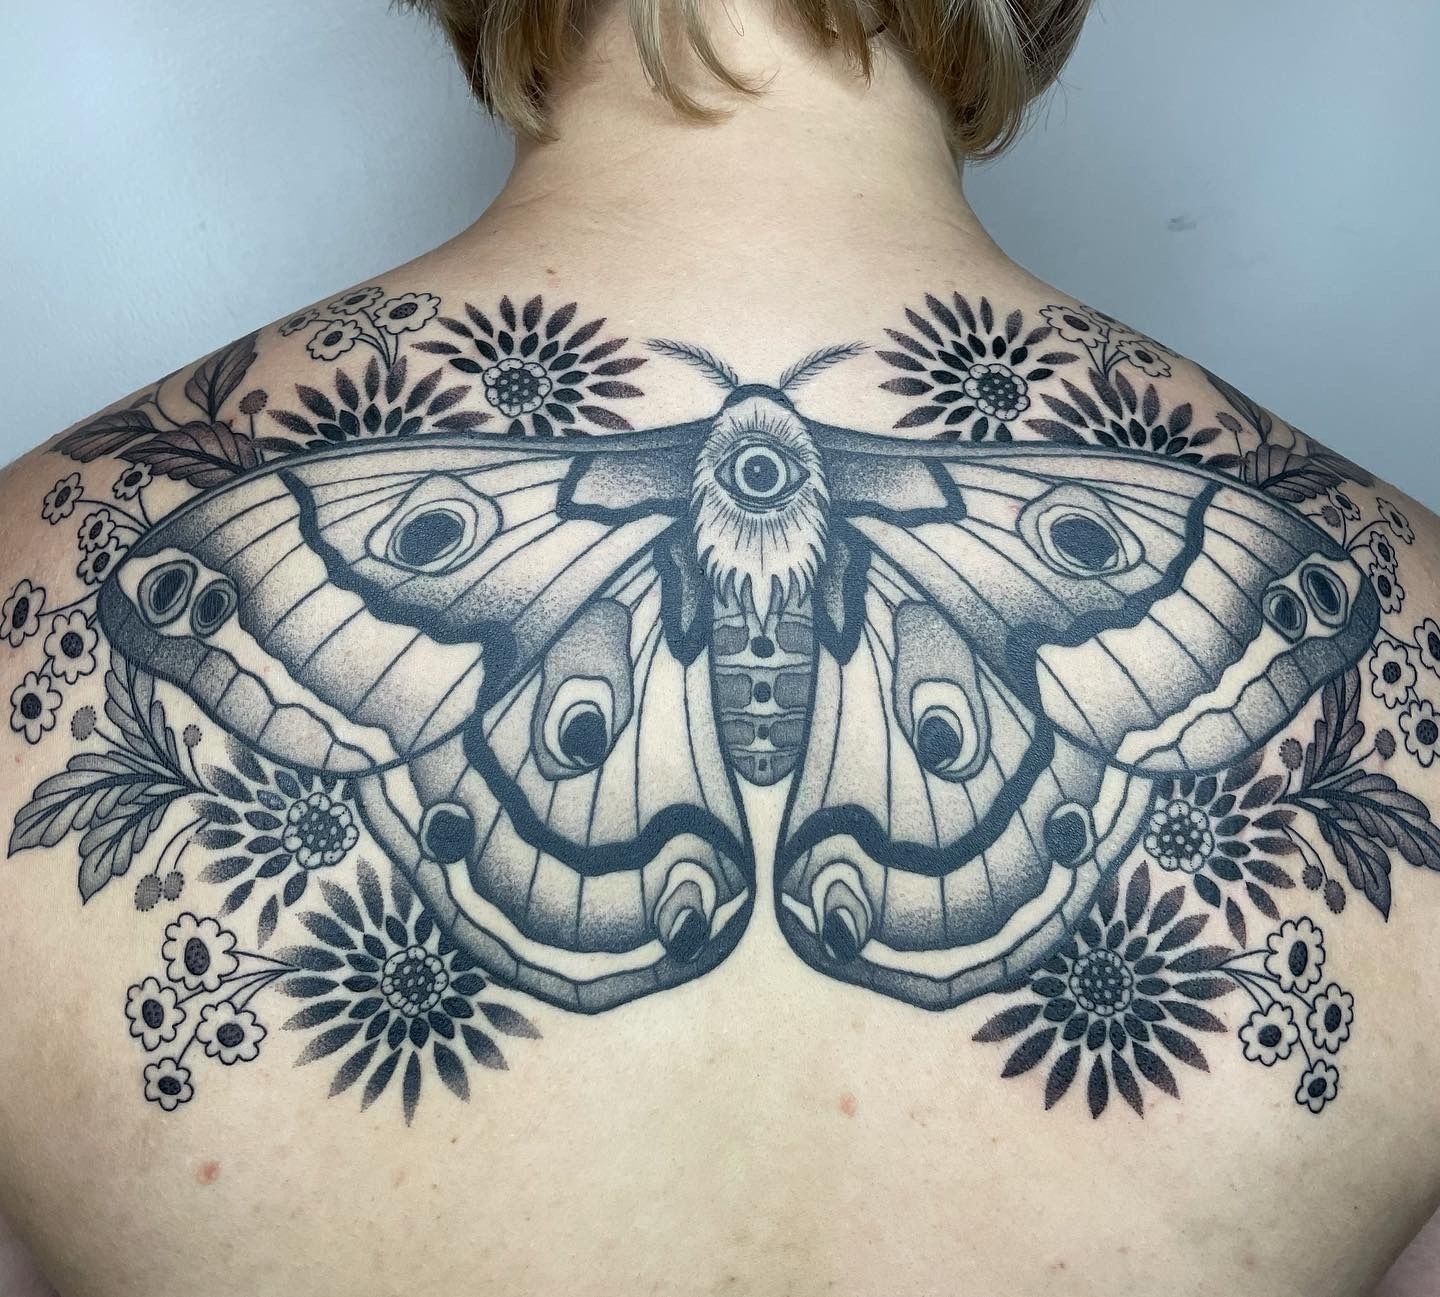 Little moth friend on the back of my arm done by Noemy at Authentink in  Sydney Australia  rtattoos